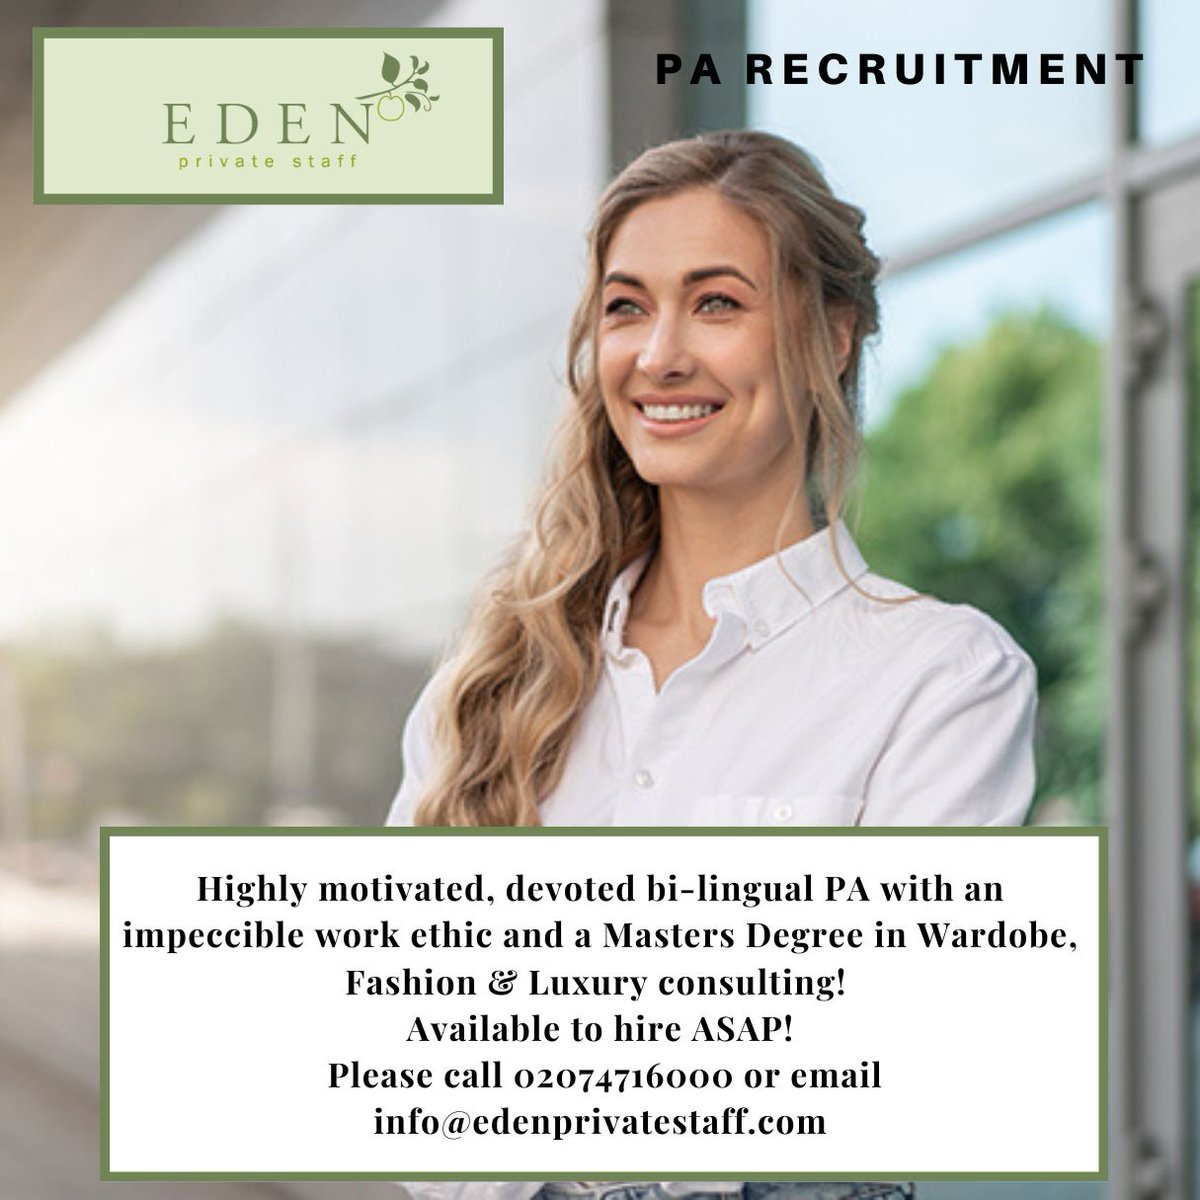 Highly motivated, devoted bi-lingual PA with an impeccible work ethic and a Masters Degree in Wardobe, Fashion & Luxury consulting! edenprivatestaff.com/resume/pa-4/ #PersonalAssistant #personalassistants #PA #EA #executivepa #privatepa#parecruitment #ExecutiveAssistant